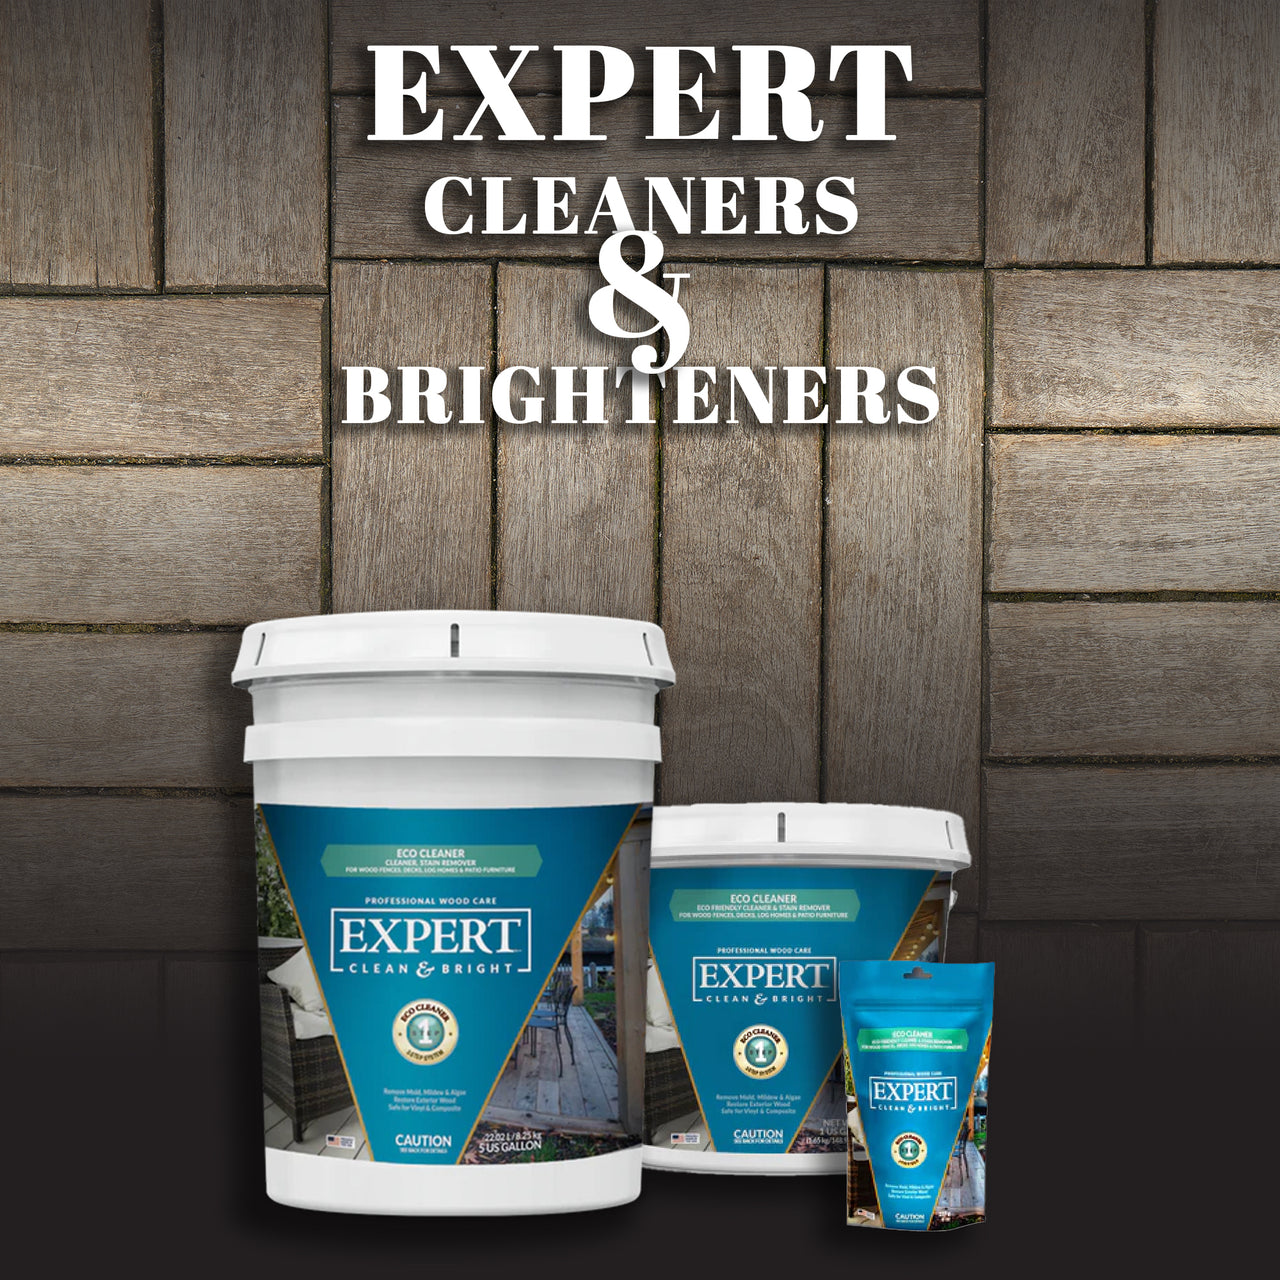 Expert Cleaners & Brighteners Paint Life Supply Co.